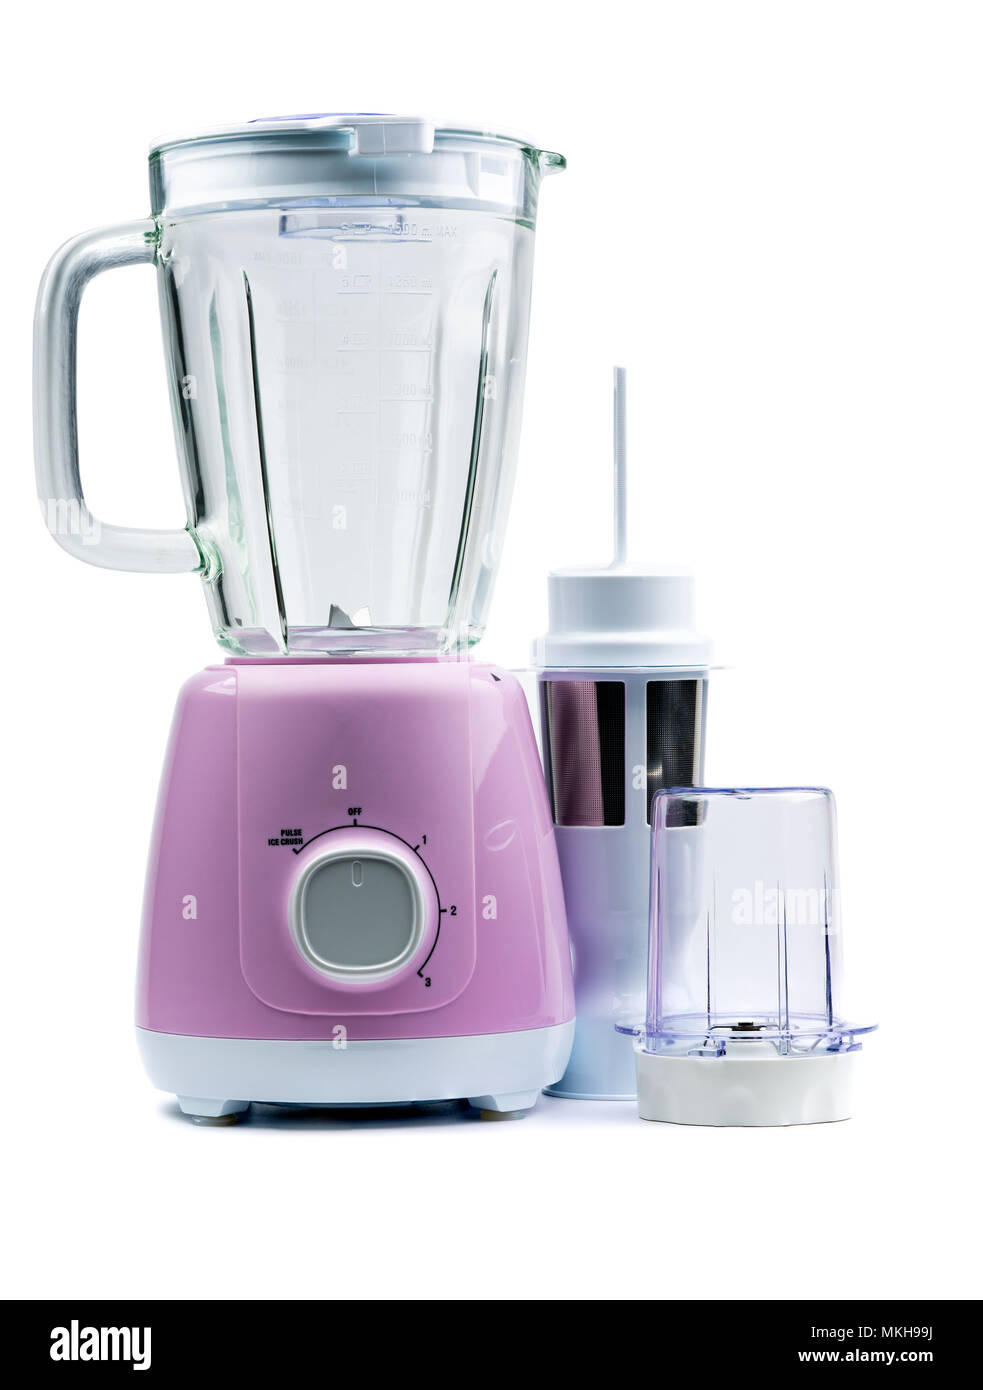 Empty purple electric blender isolated on white background with copy space. Machine for healthy lifestyle. Kitchen appliances Stock Photo